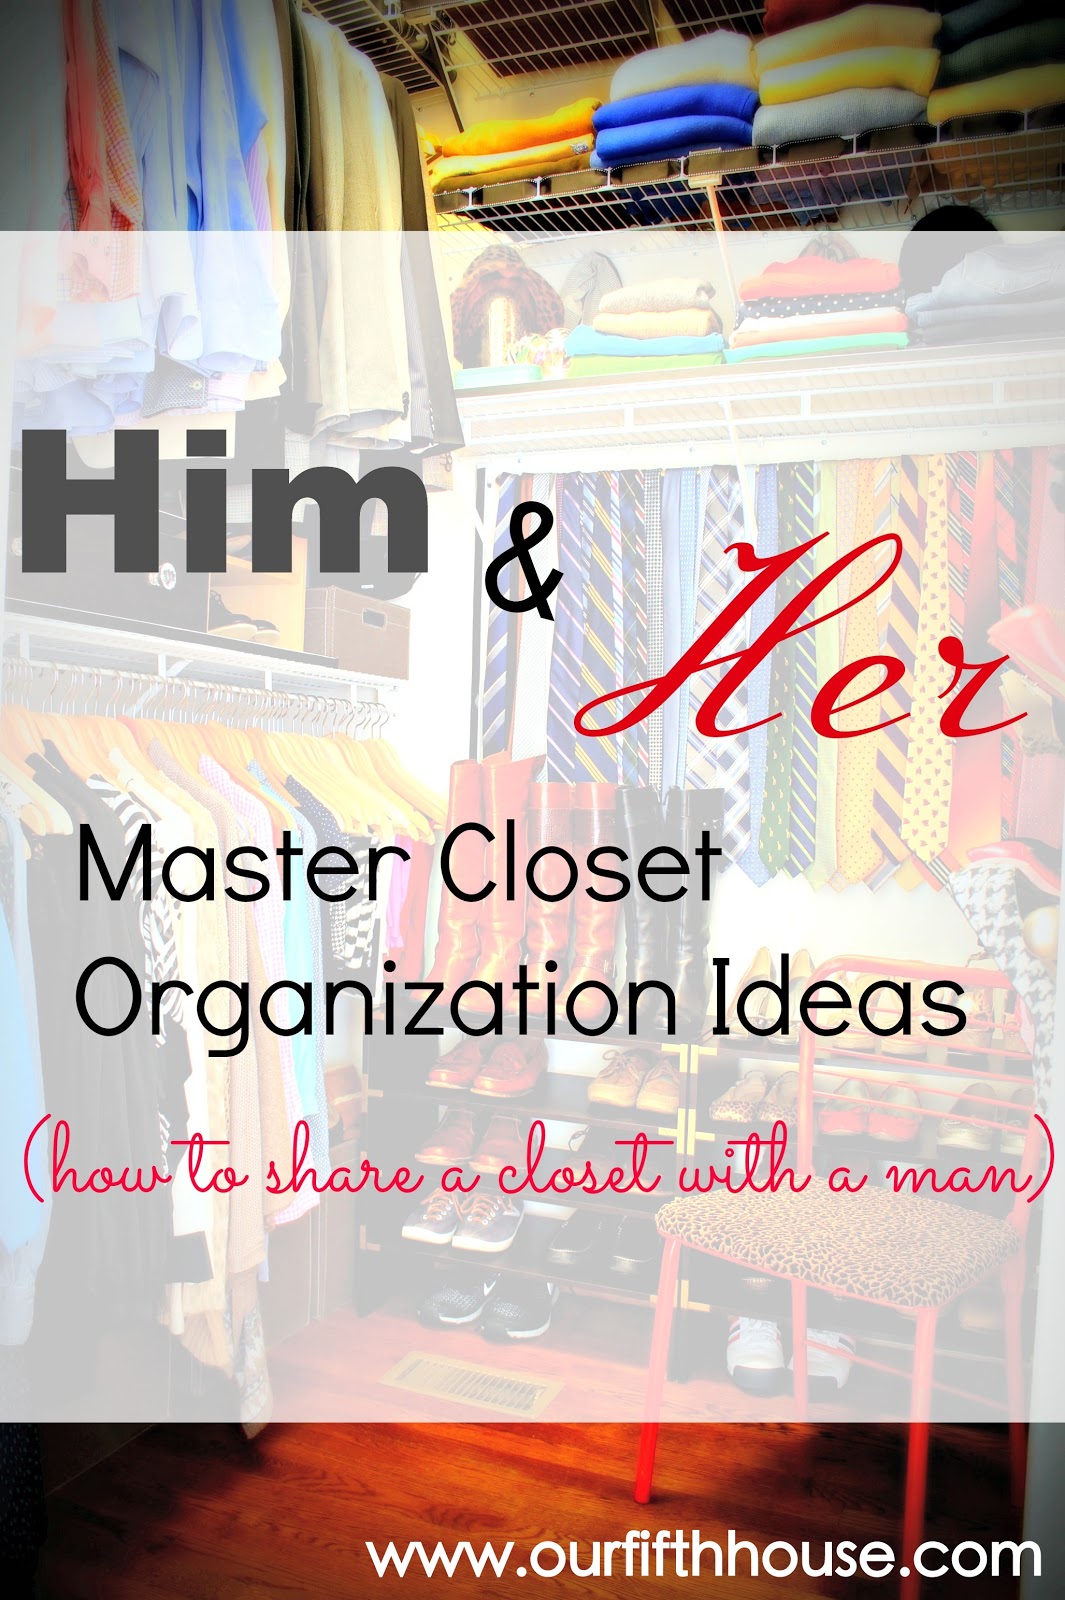 Our Fifth House: Master (Closet Organization Ideas)